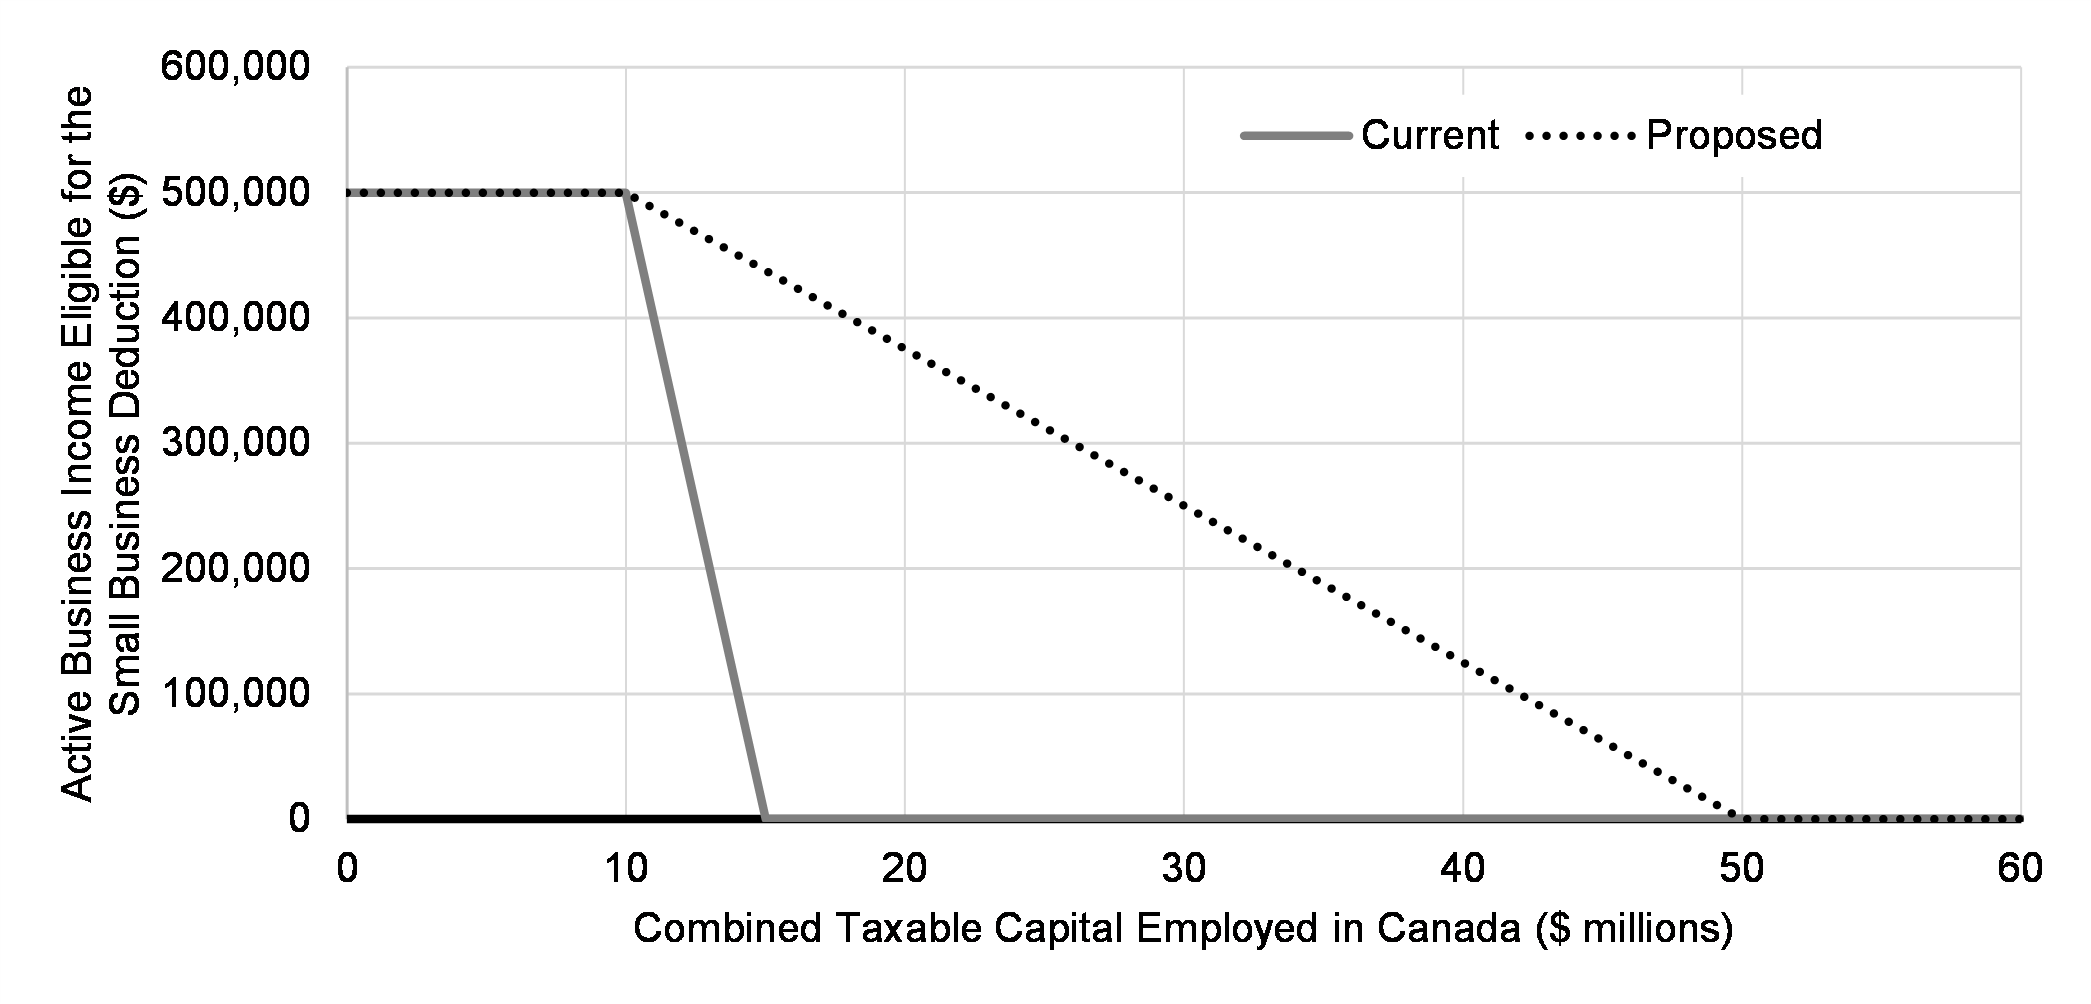 Chart 1: Current and Proposed Reductions of the Business Limit Based on Taxable Capital